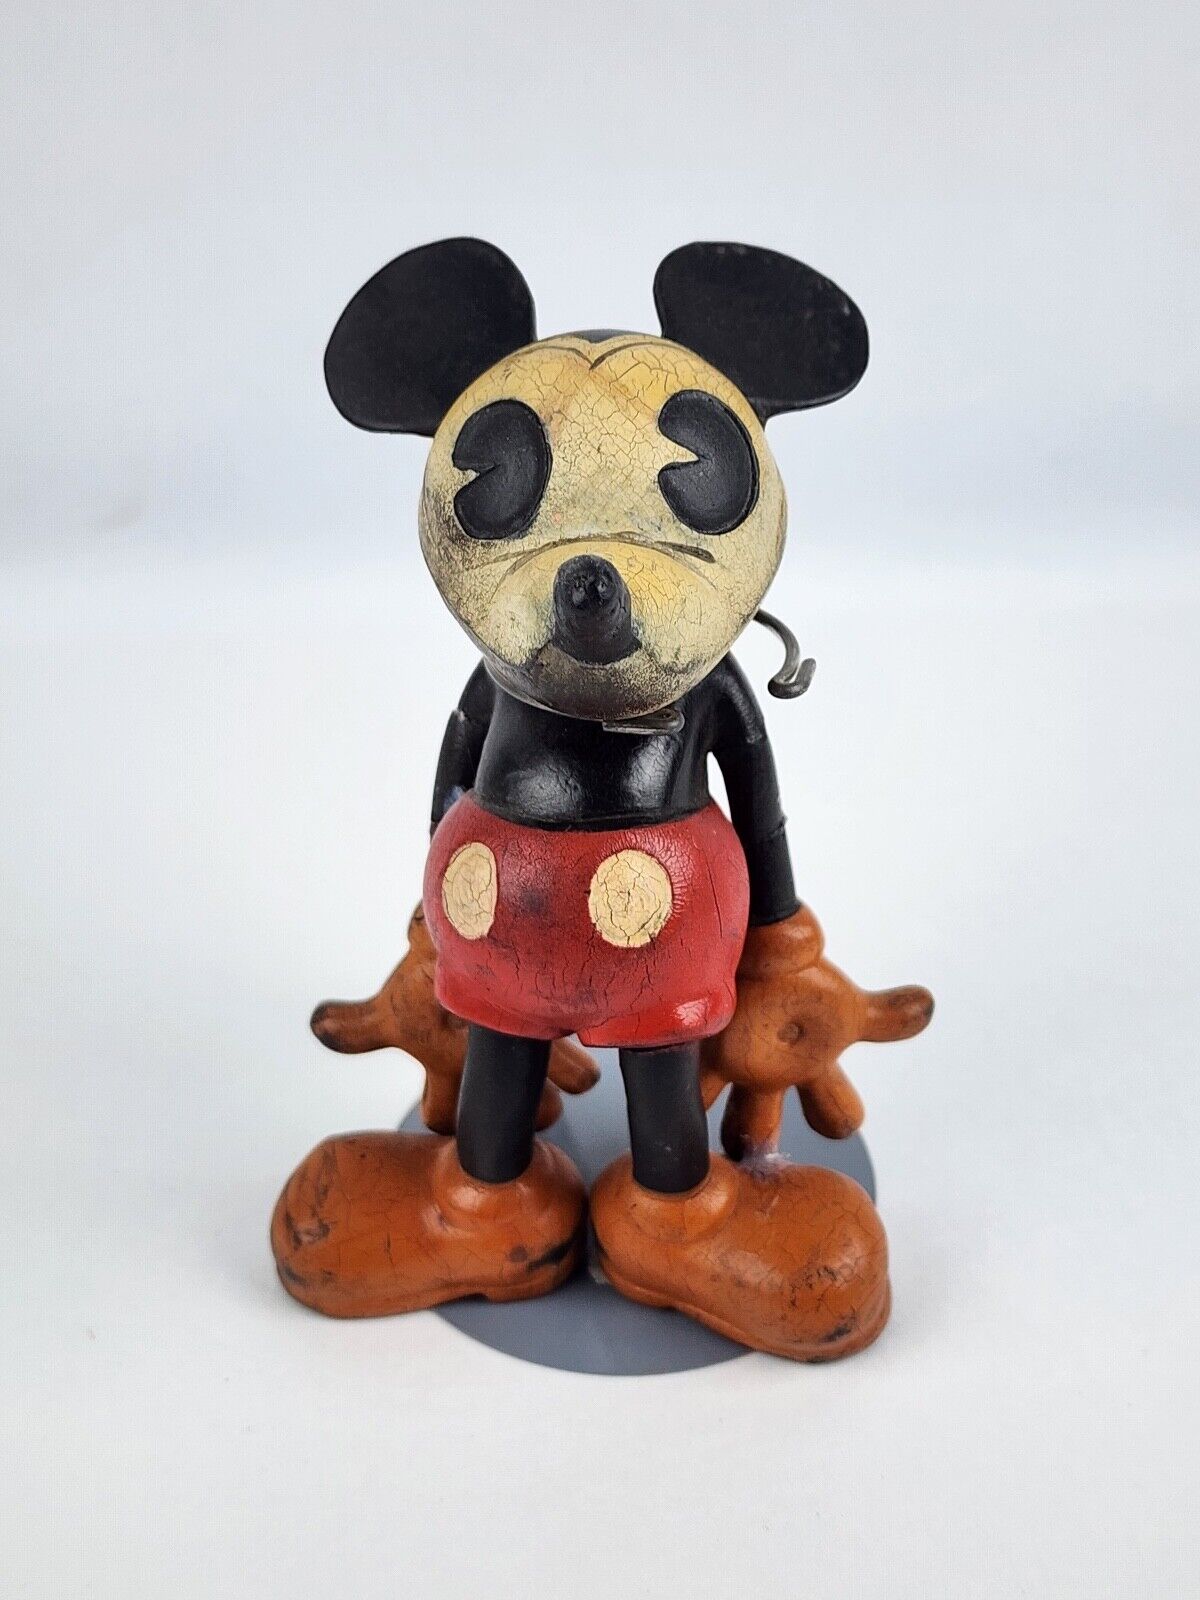 1930's Sieberling Rubber Mickey Mouse Pie-eyed Figure Toy Disney -has repairs